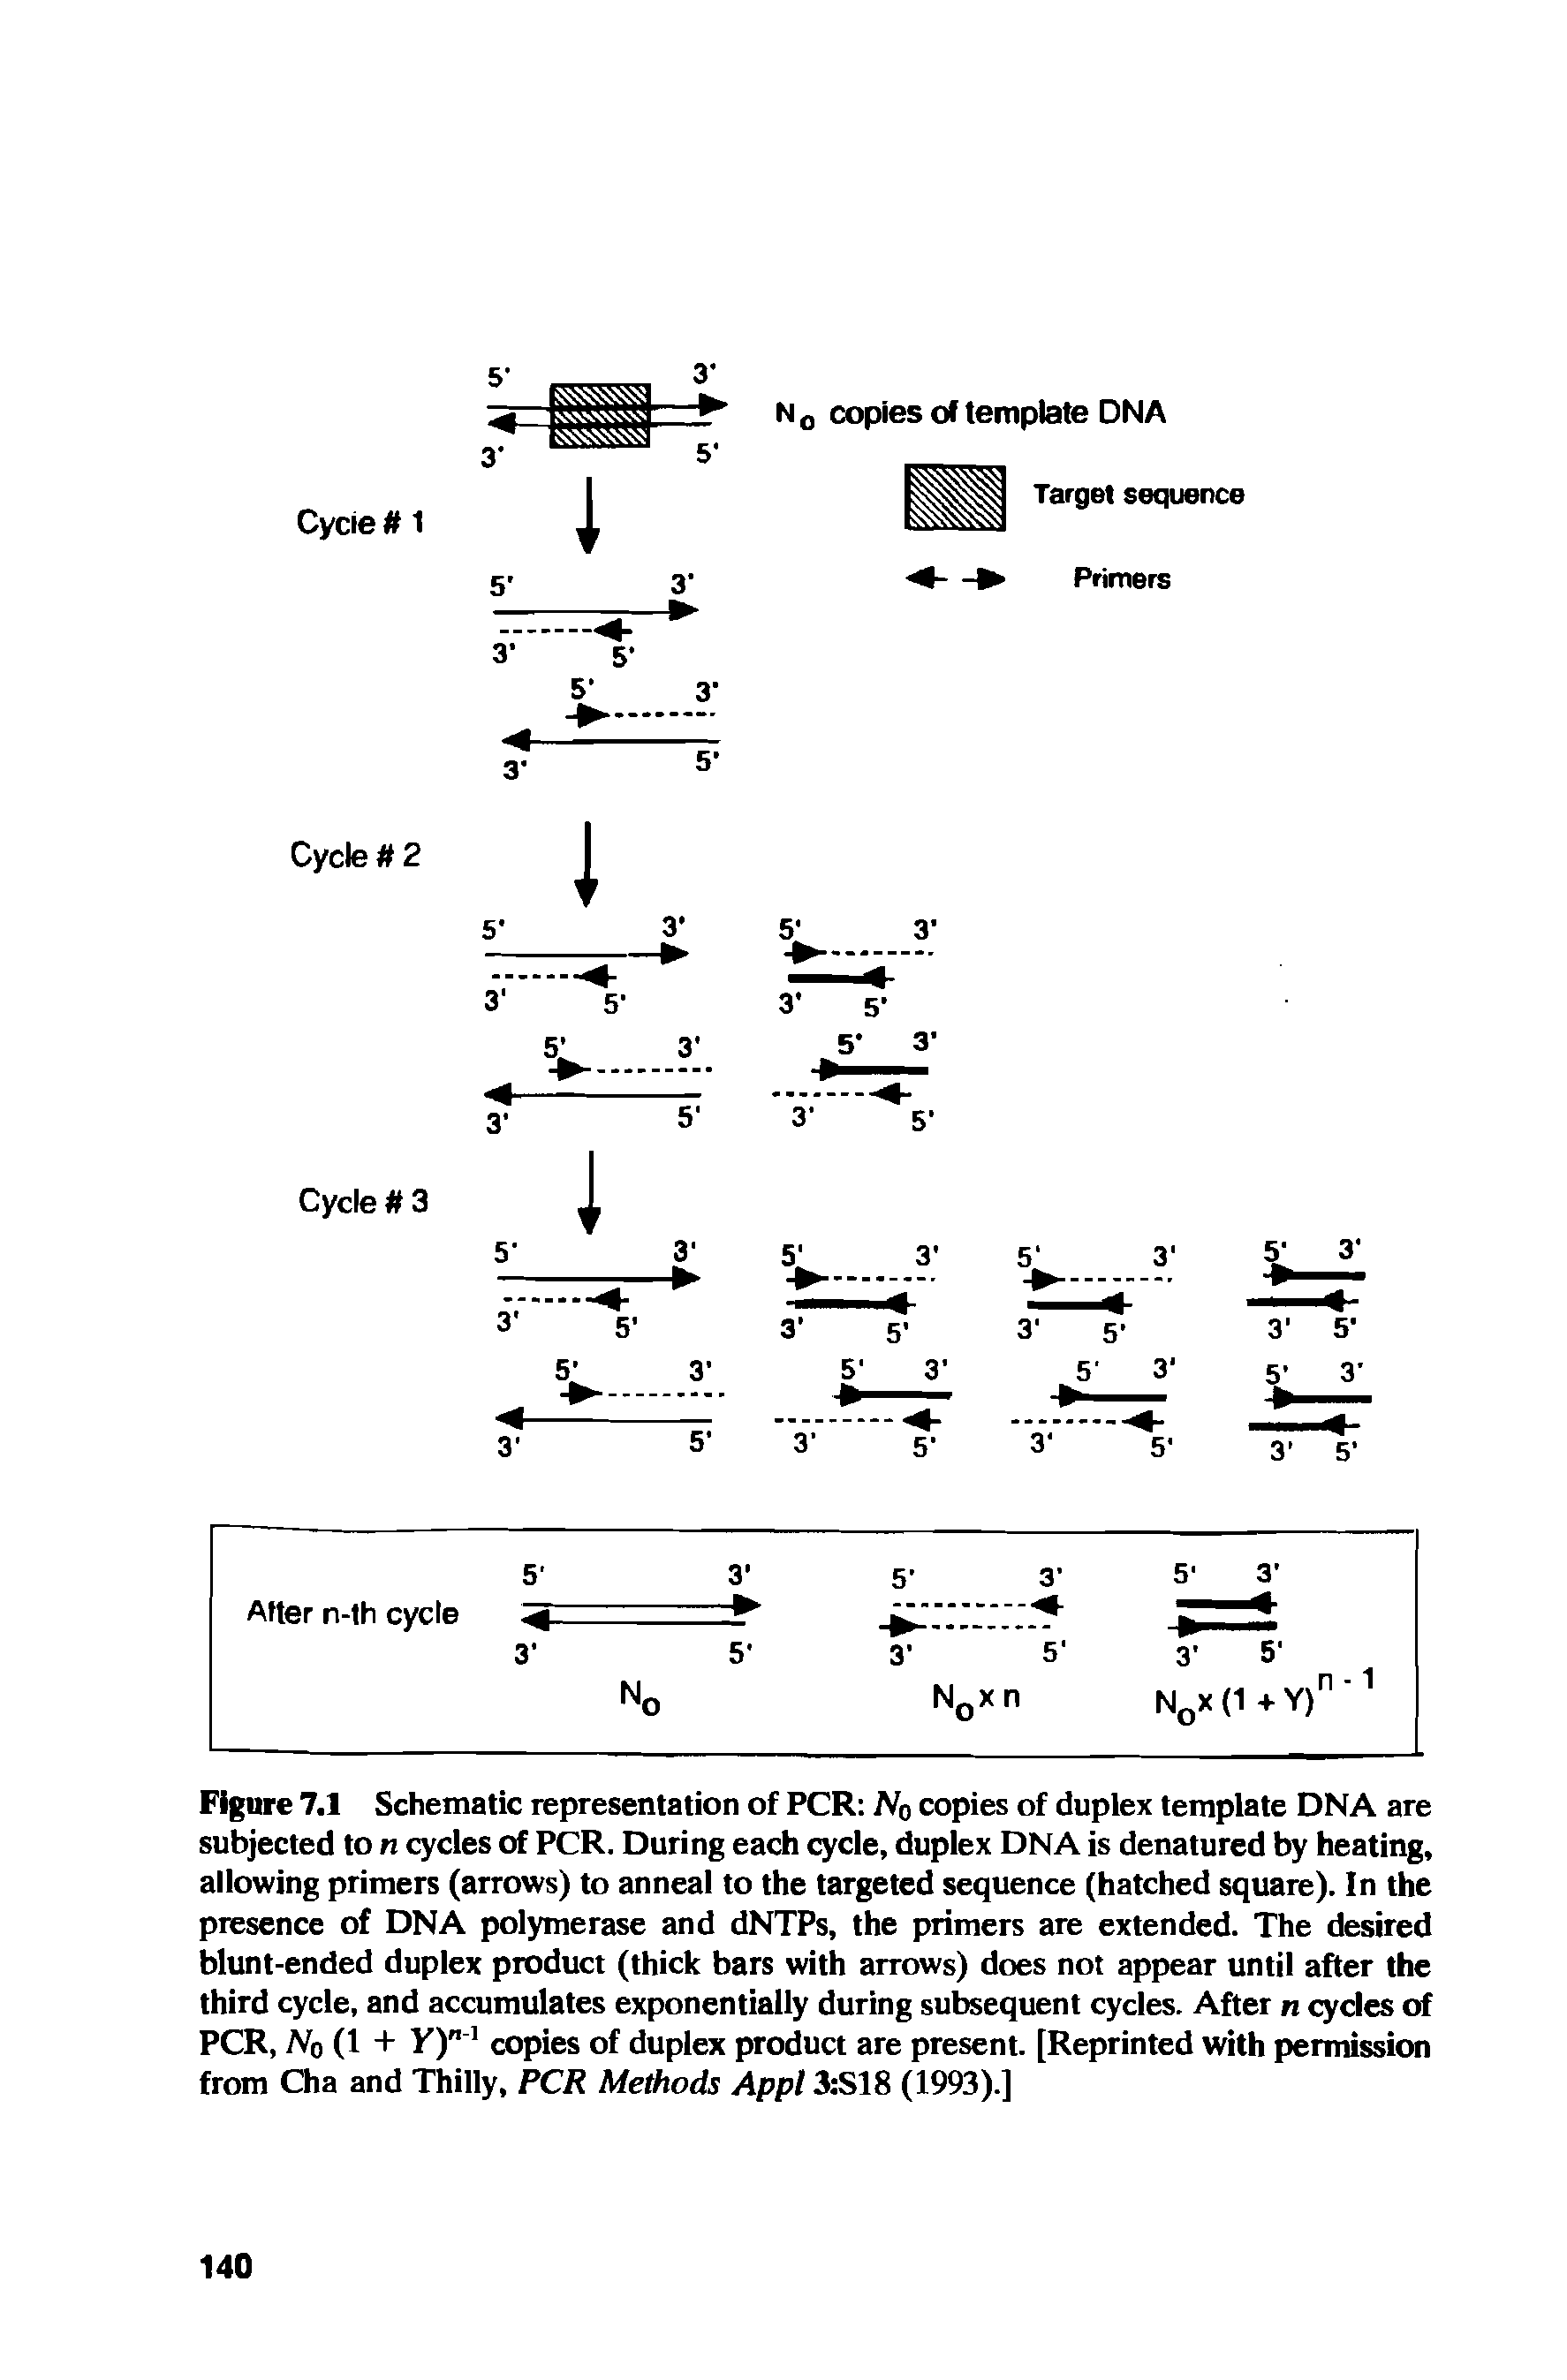 Figure 7.1 Schematic representation of PCR N0 copies of duplex template DNA are subjected to n cycles of PCR. During each cycle, duplex DNA is denatured by heating, allowing primers (arrows) to anneal to the targeted sequence (hatched square). In the presence of DNA polymerase and dNTPs, the primers are extended. The desired blunt-ended duplex product (thick bars with arrows) does not appear until after the third cycle, and accumulates exponentially during subsequent cycles. After n cycles of PCR, N0 (1 + Y)""1 copies of duplex product are present. [Reprinted with permission from Cha and Thilly, PCR Methods Appl 3 S18 (1993).]...